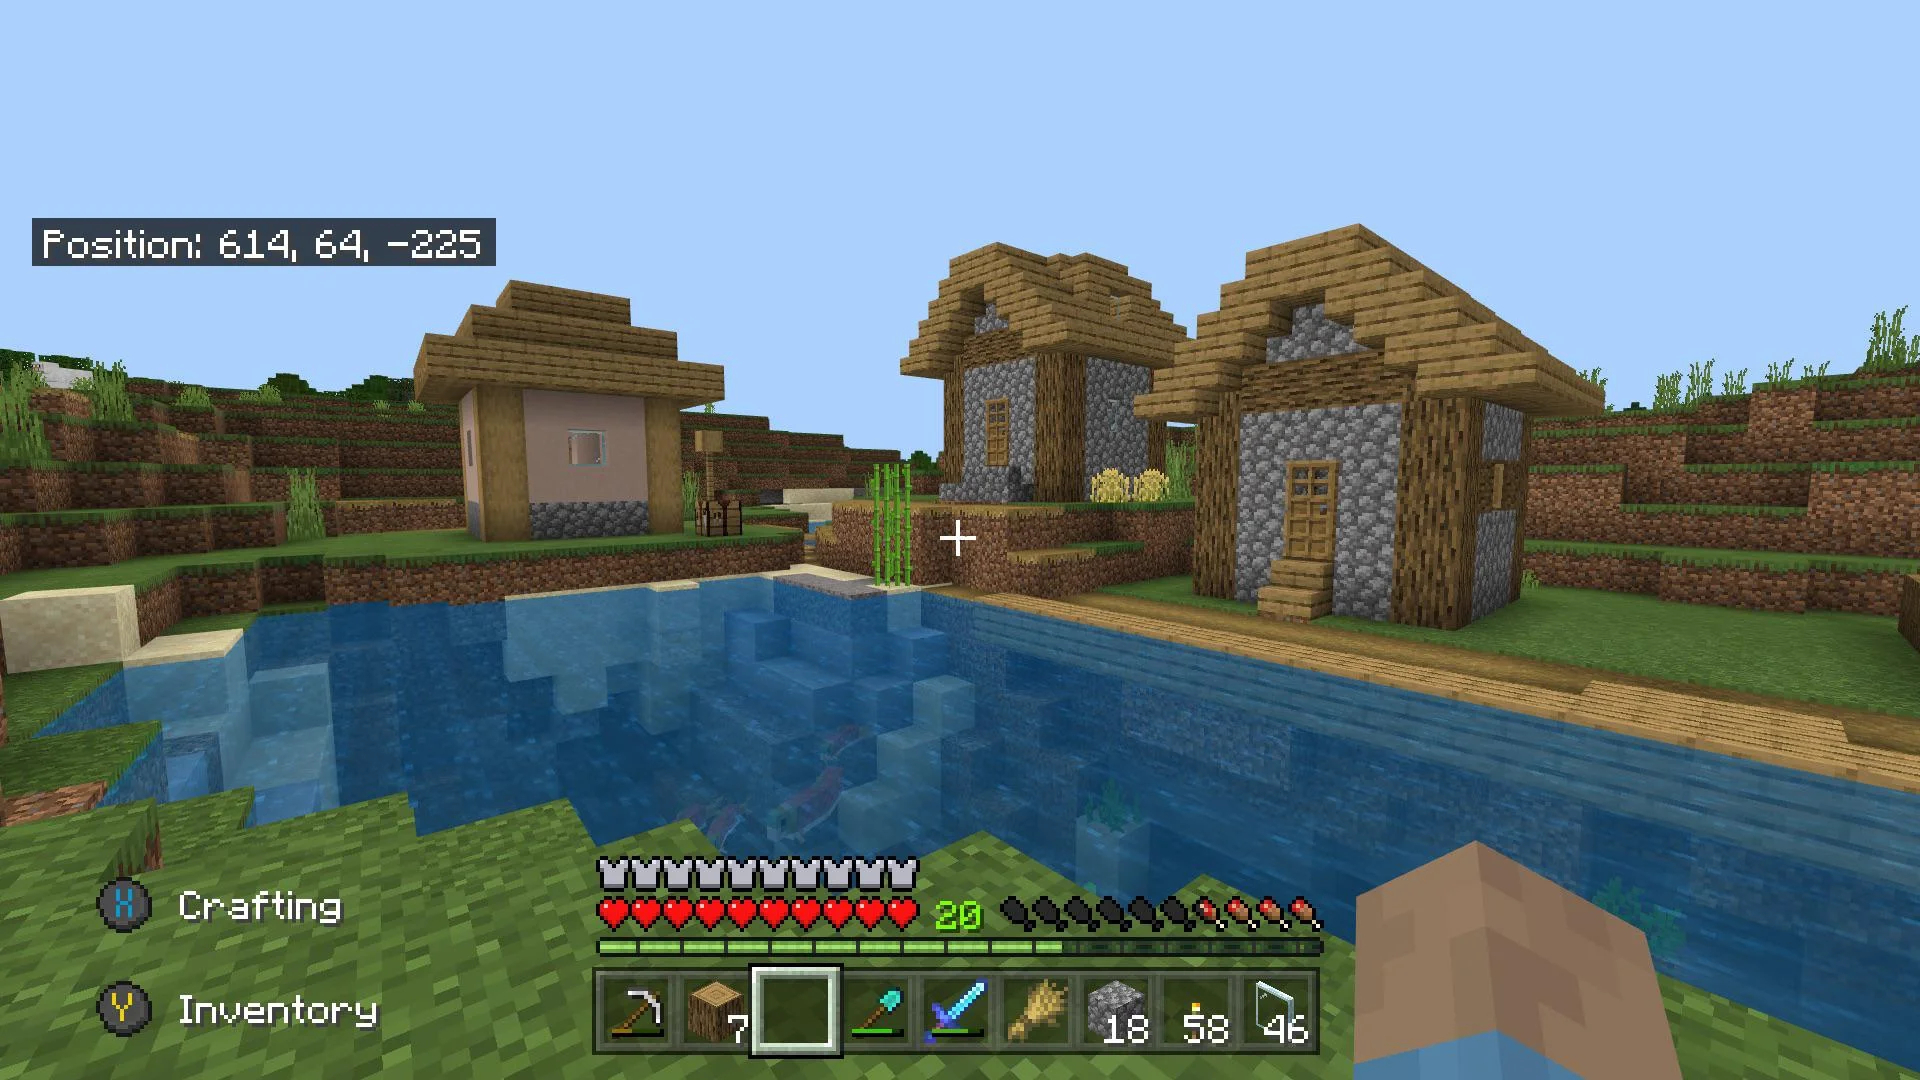 Example of a Minecraft village